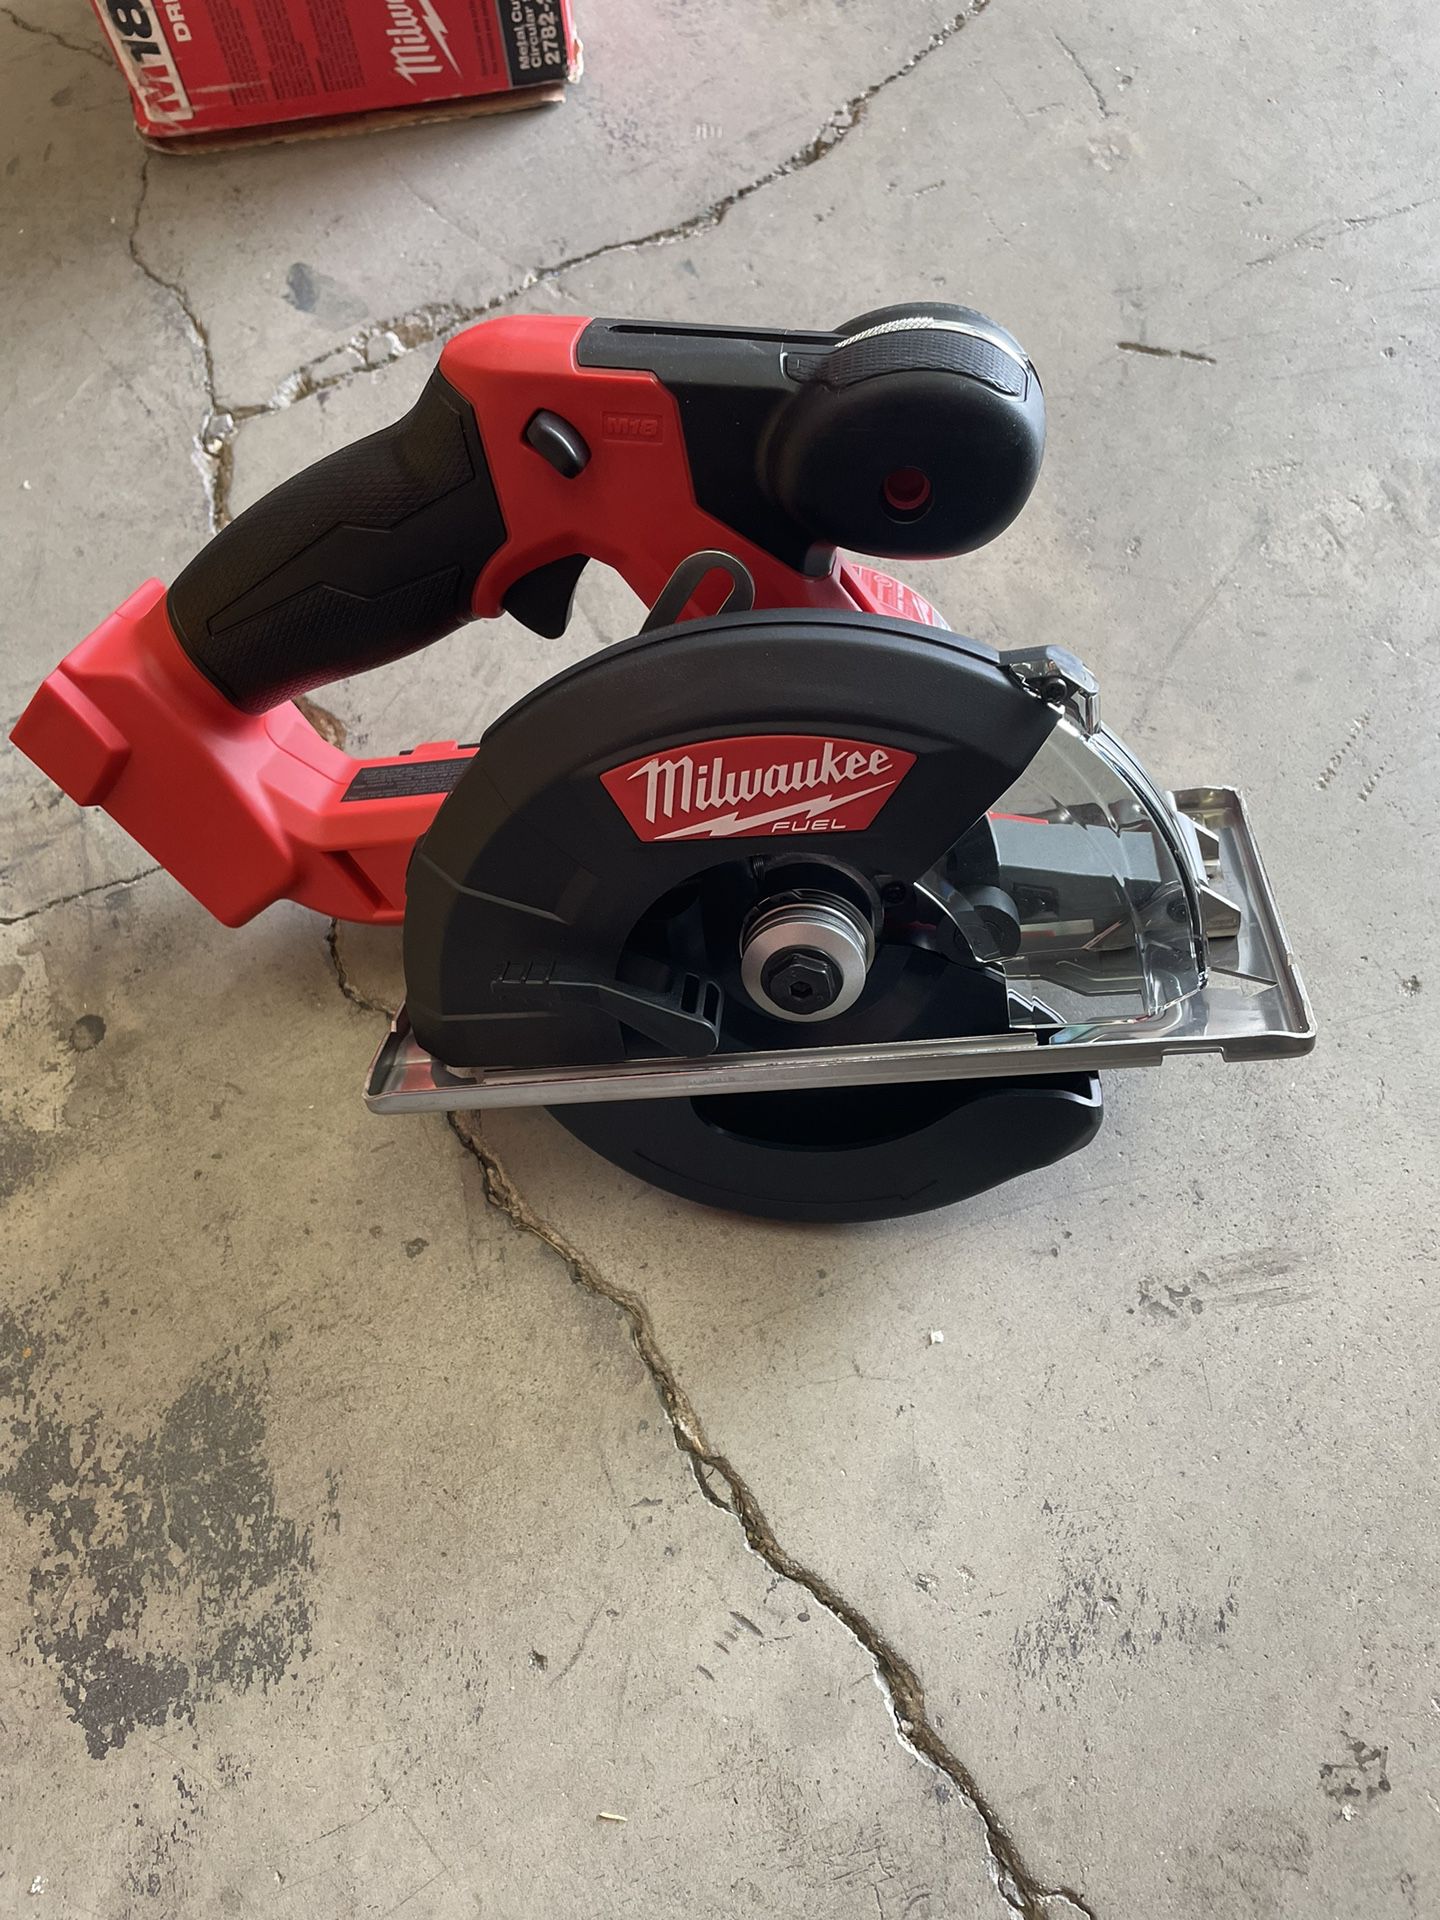 Milwaukee M18 FUEL 18-Volt Lithium-Ion Brushless Cordless Metal Cutting 5-3/ in. Circular Saw (Tool-Only) w/ Metal Saw Blade for Sale in Hesperia, CA  OfferUp